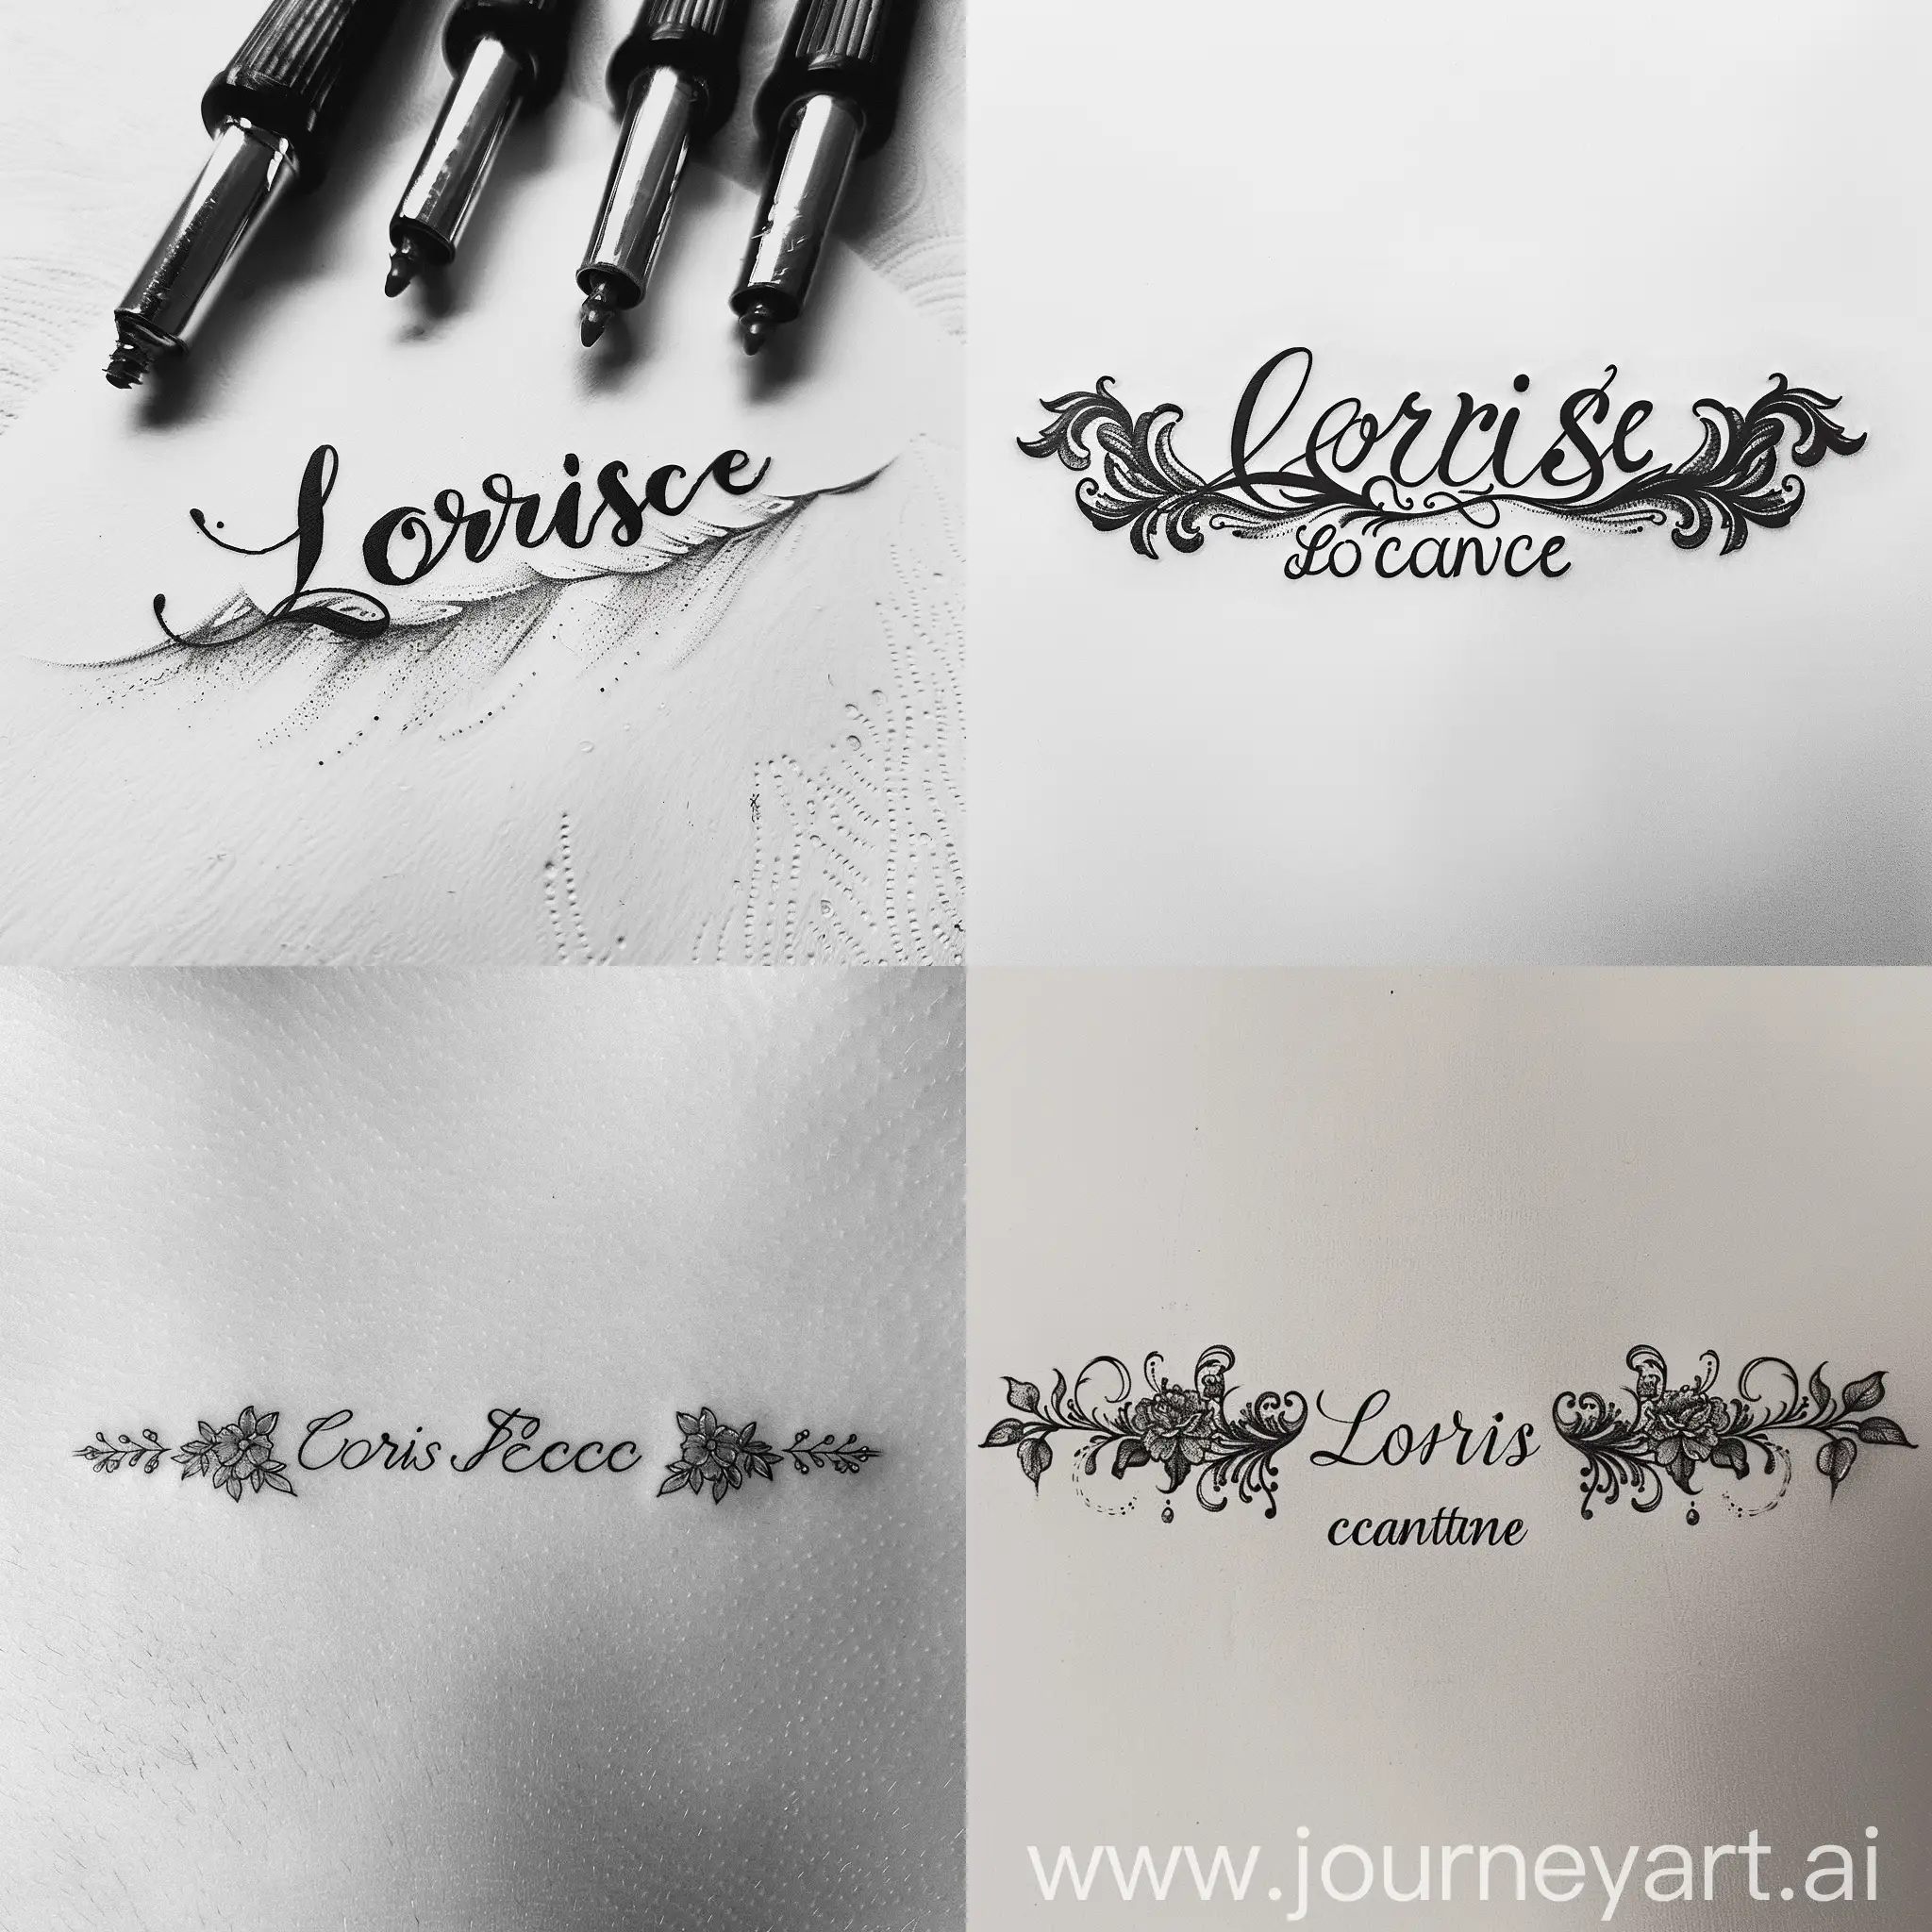 minimalist tattoo design of calligraphy of name loris and oceane, on a white background

